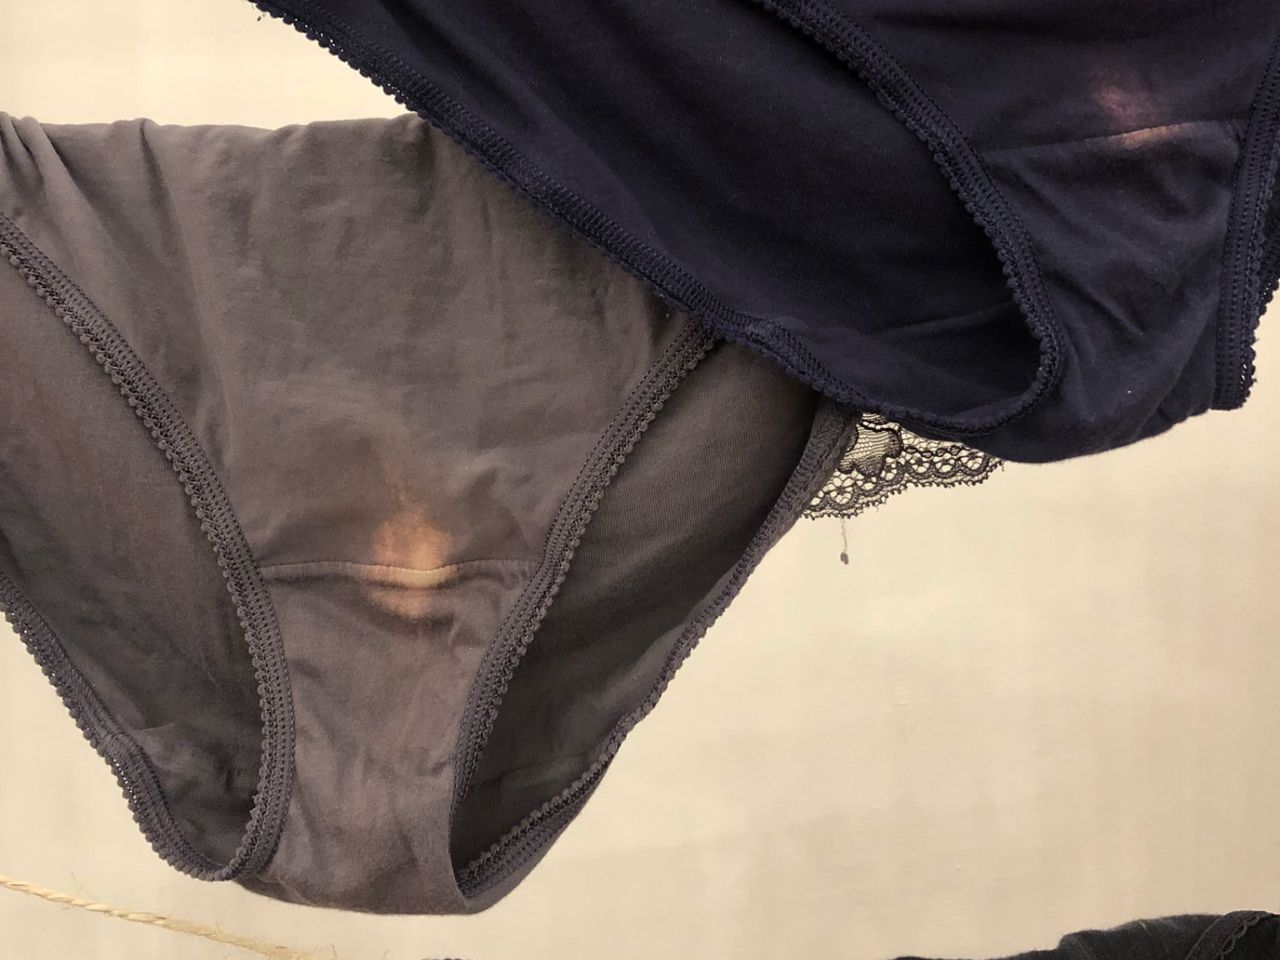 This bleached patch in your underwear is completely normal